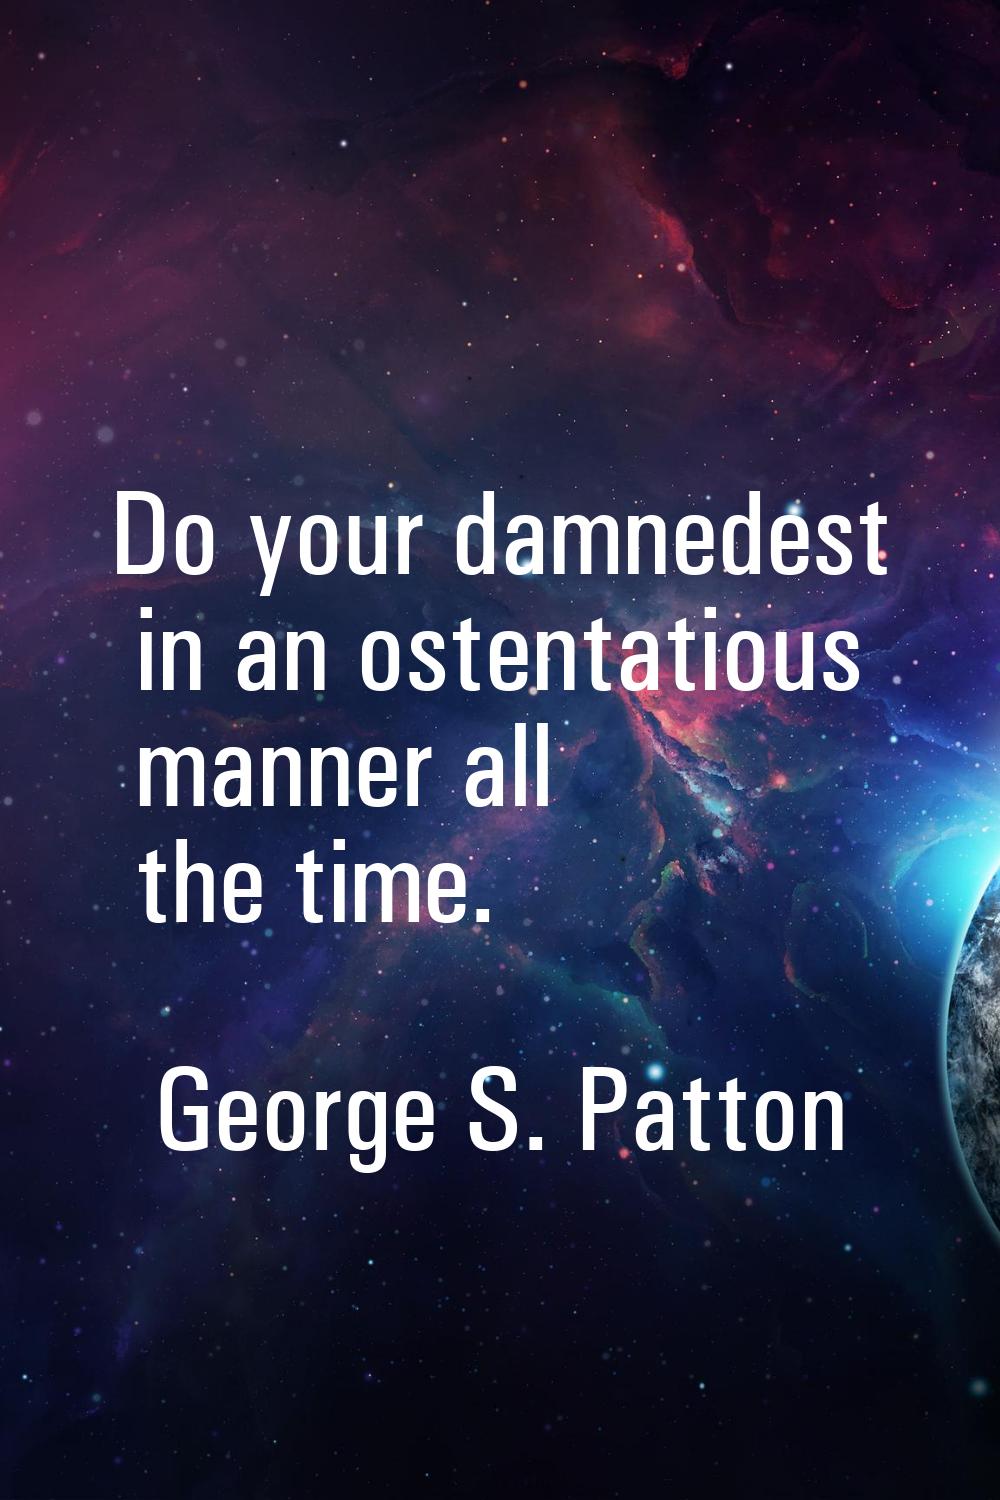 Do your damnedest in an ostentatious manner all the time.